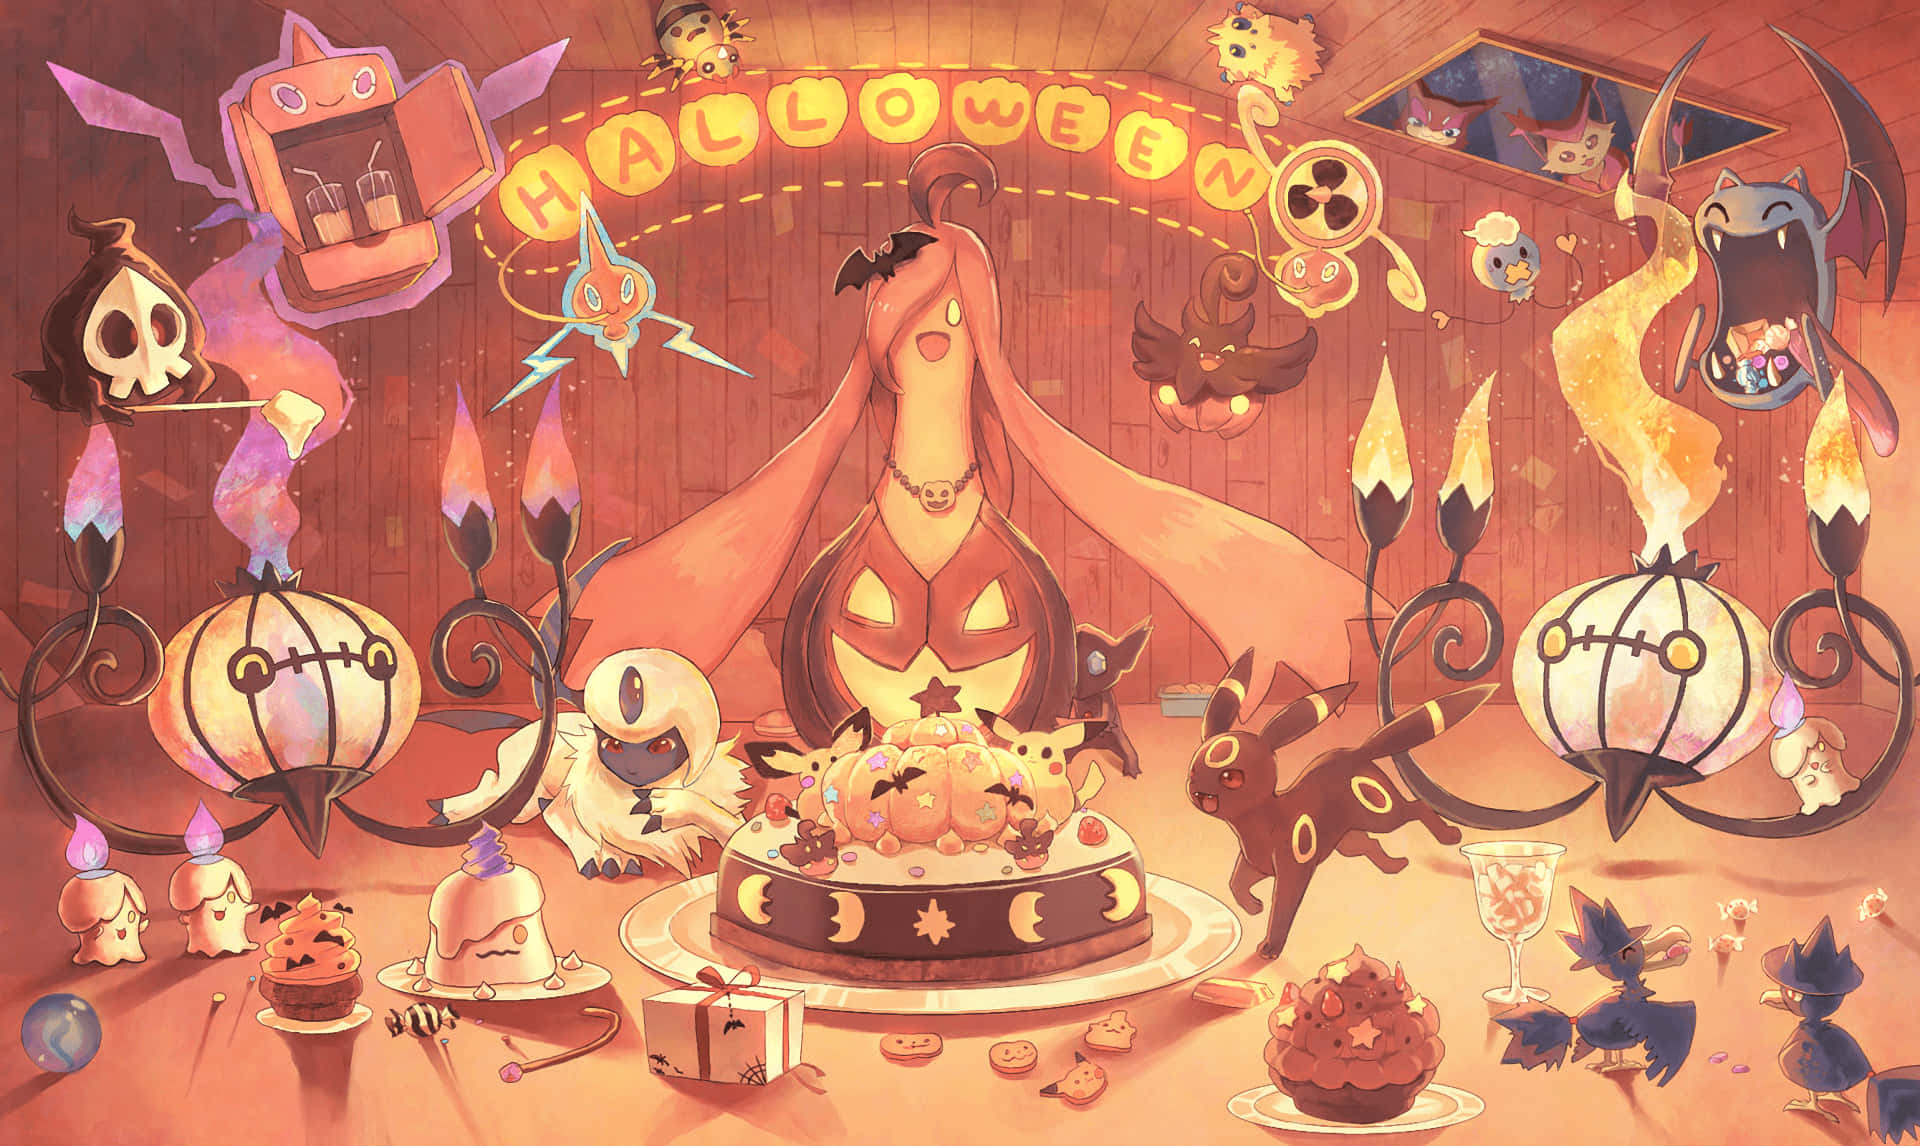 Catch all the Ghosts and Pumpkins this Halloween in Pokemon adventure! Wallpaper